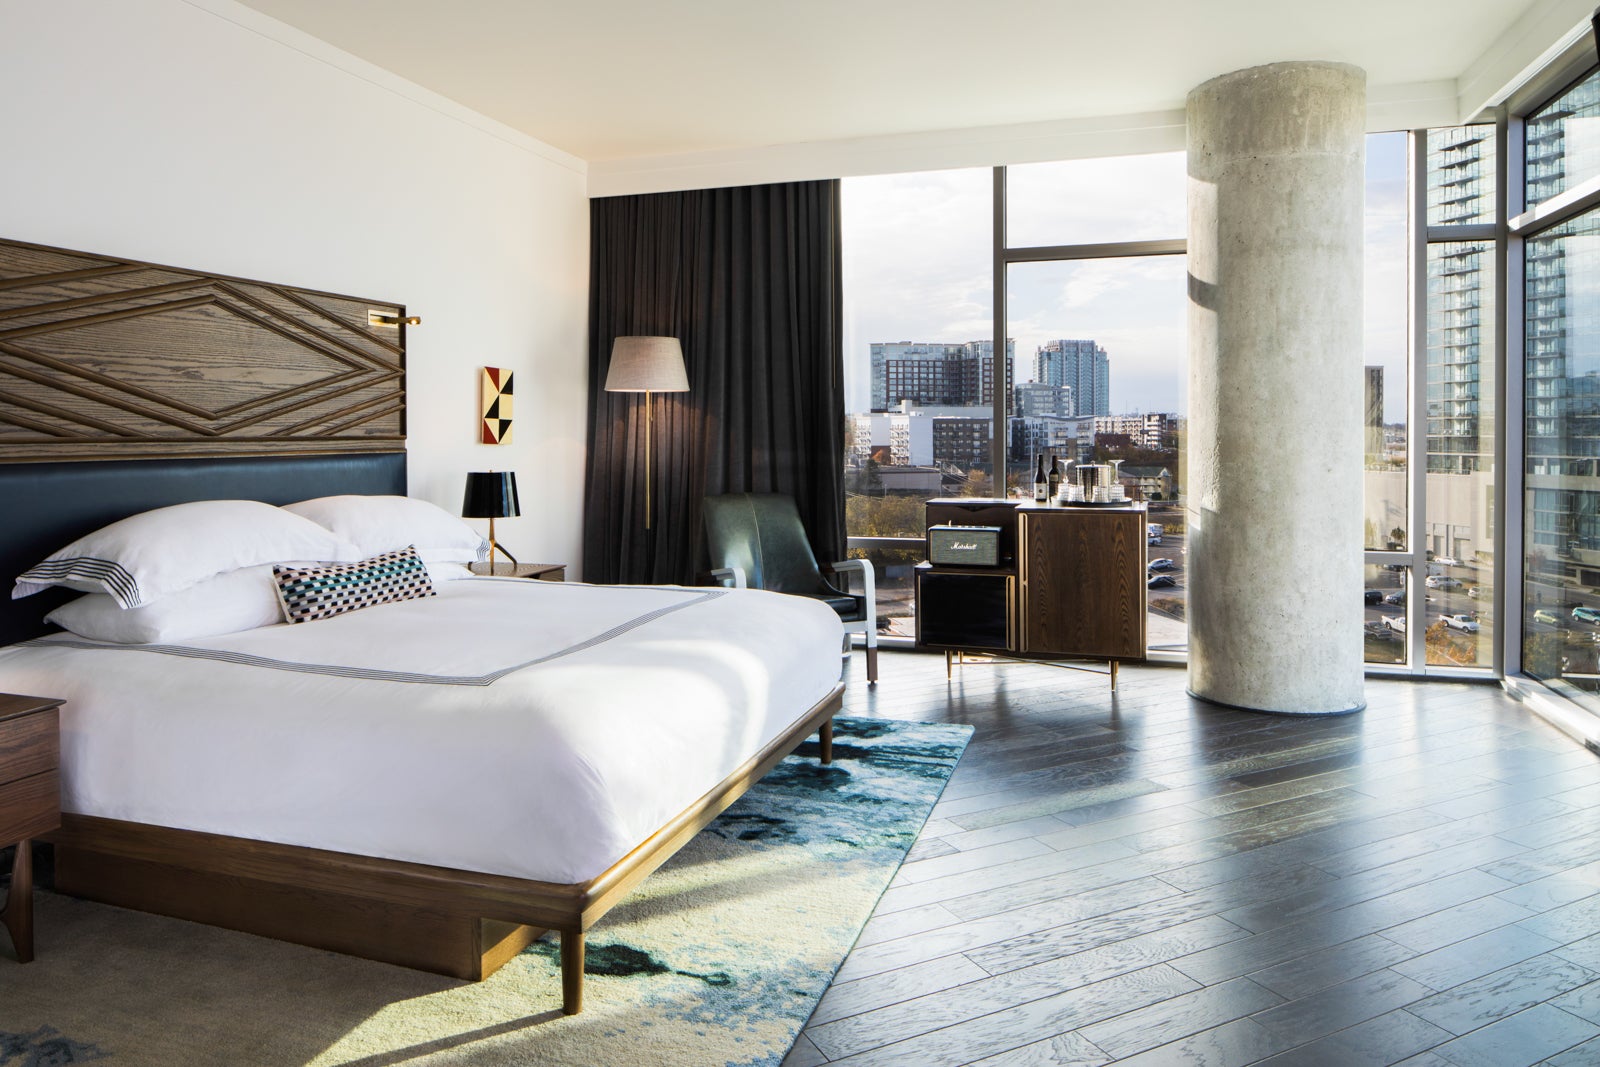 The 15 best hotels to book in Nashville